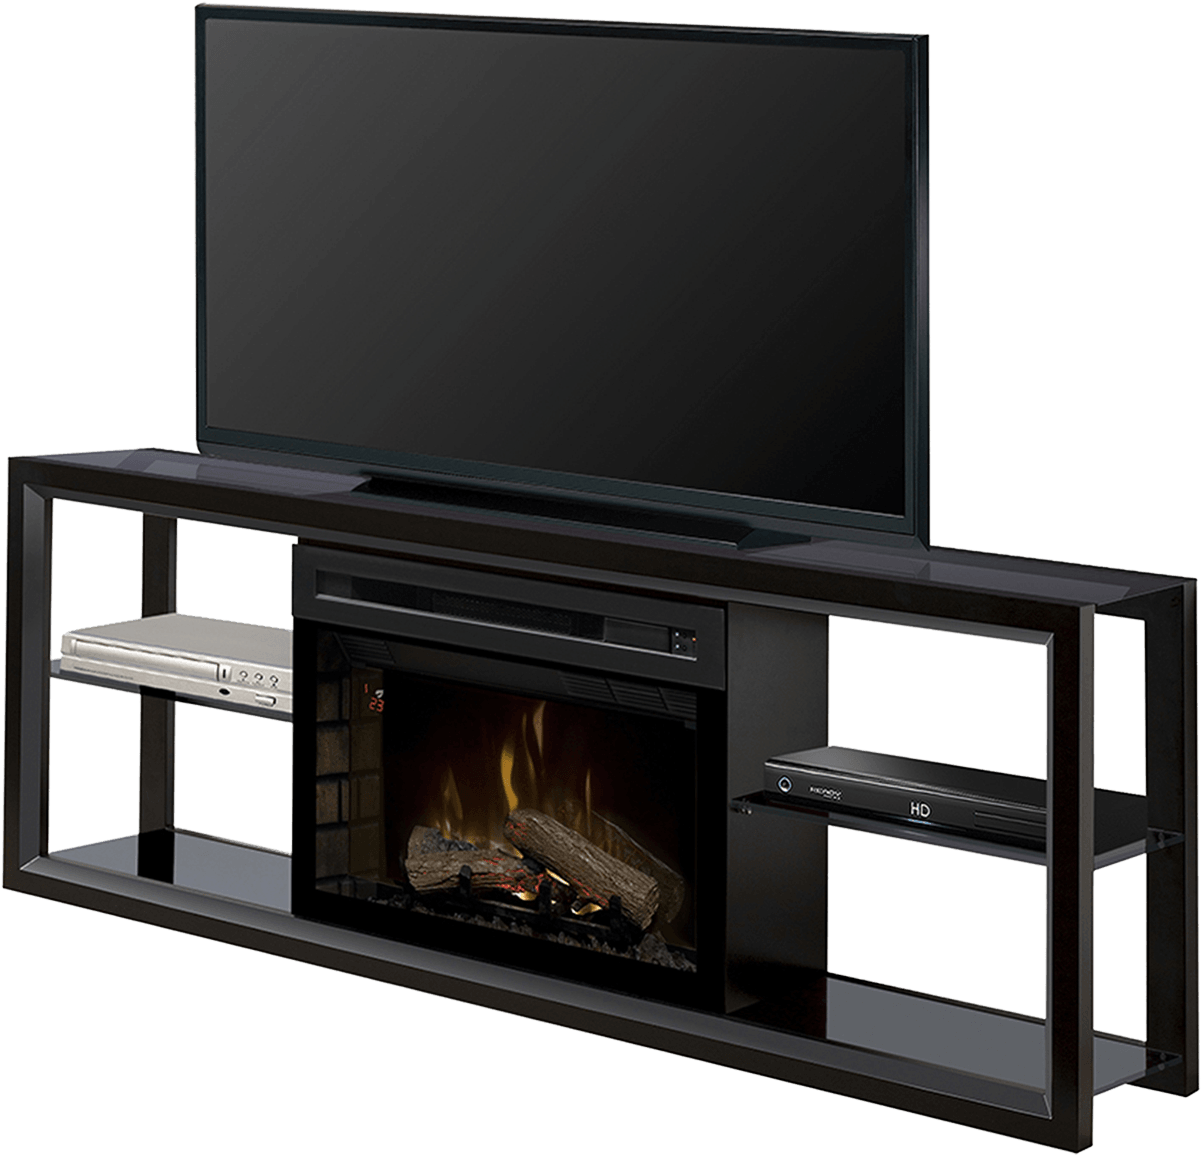 Modern T V Standwith Builtin Fireplace PNG